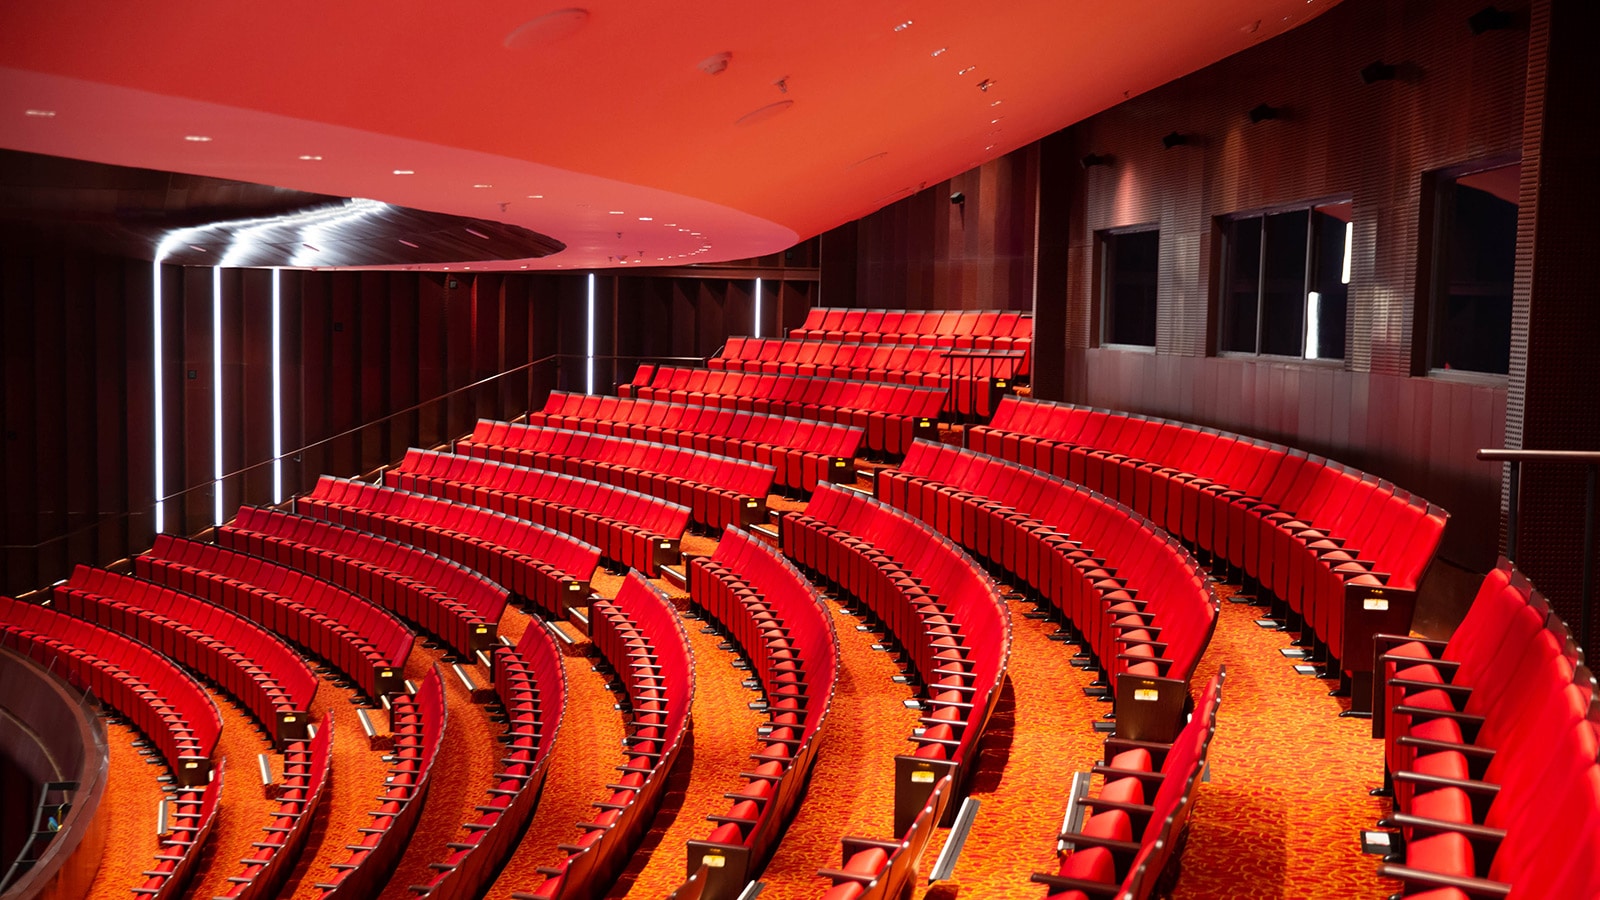 Meyer Sound Constellation Plays a Starring Acoustical Role at New Jakarta Theatre